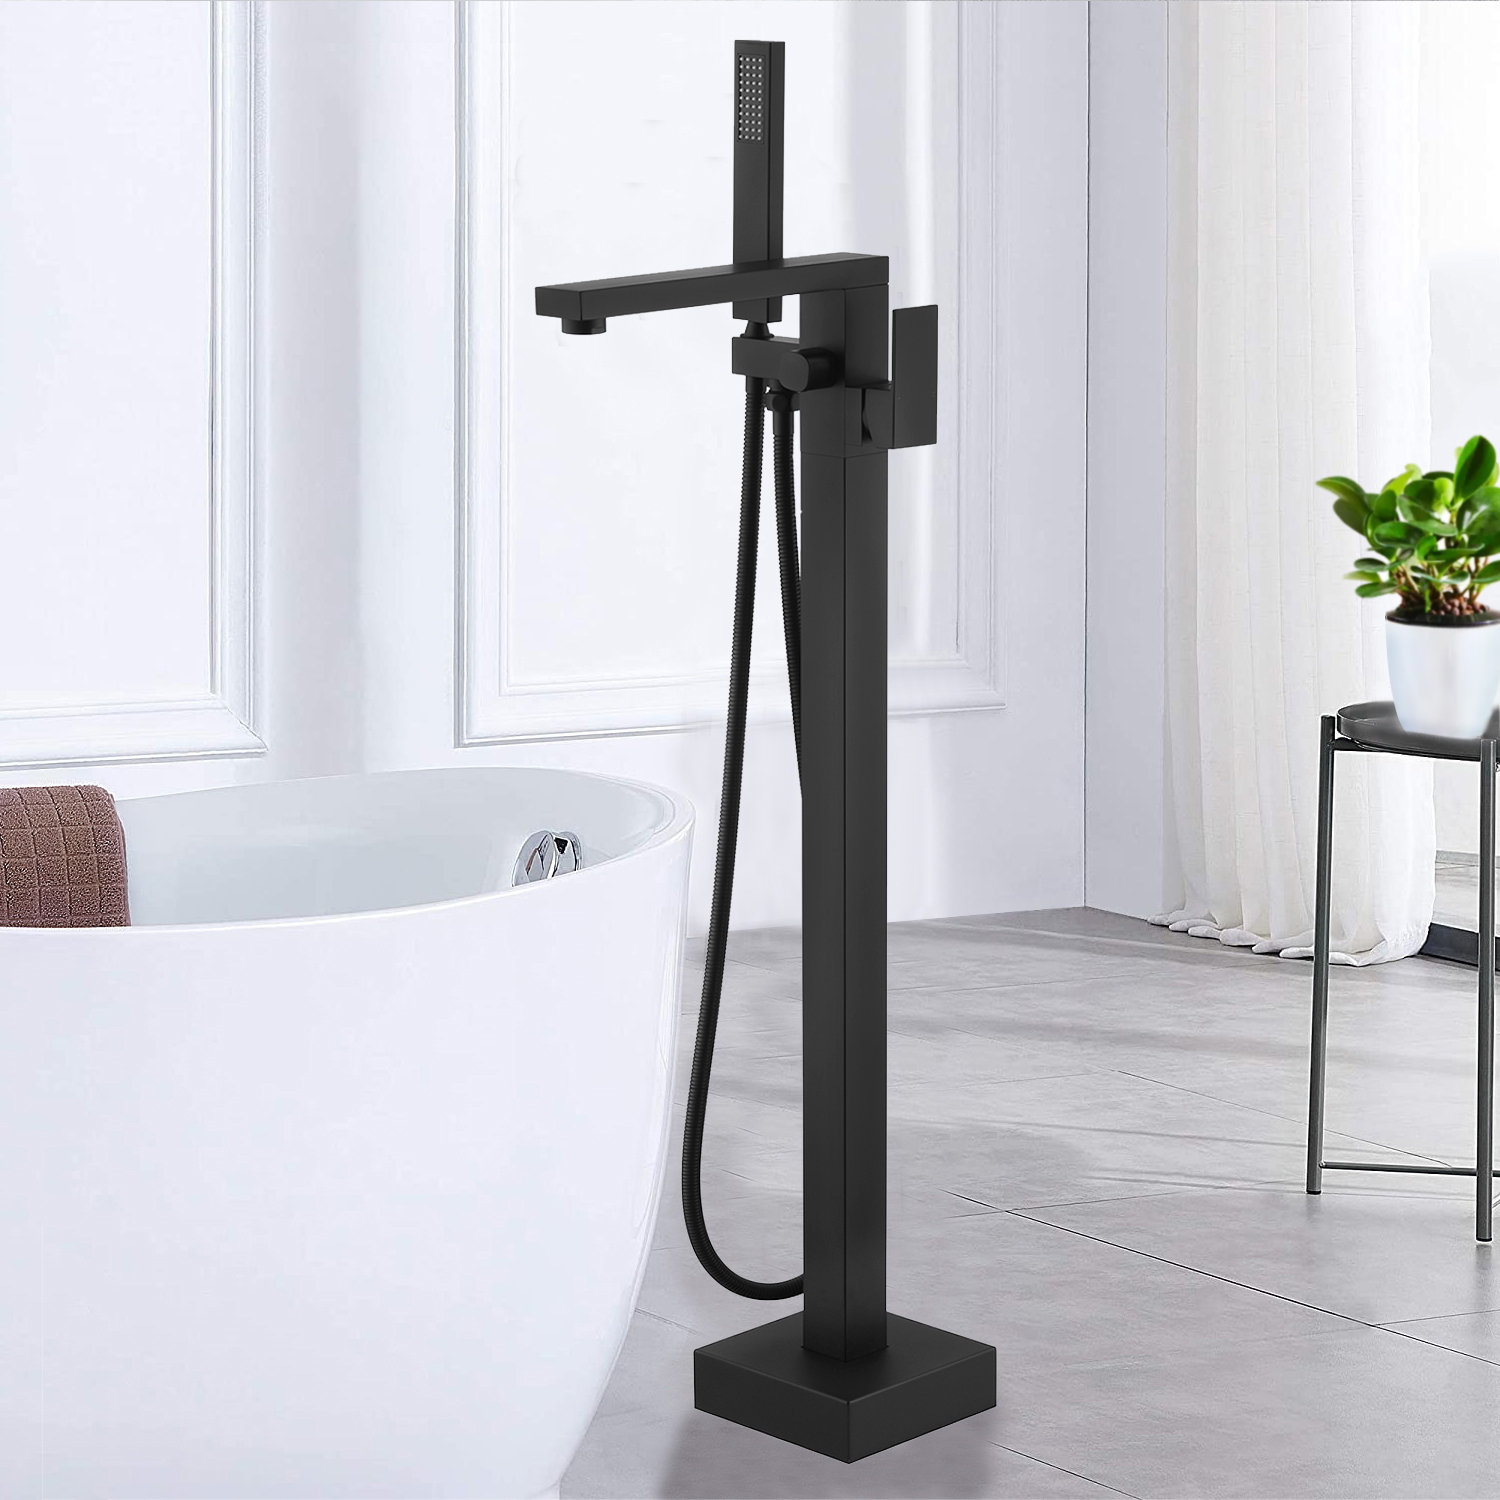 Free Standing Bathtub Faucet Tub Filler With Hand Shower Floor Mount Mixer Tap 